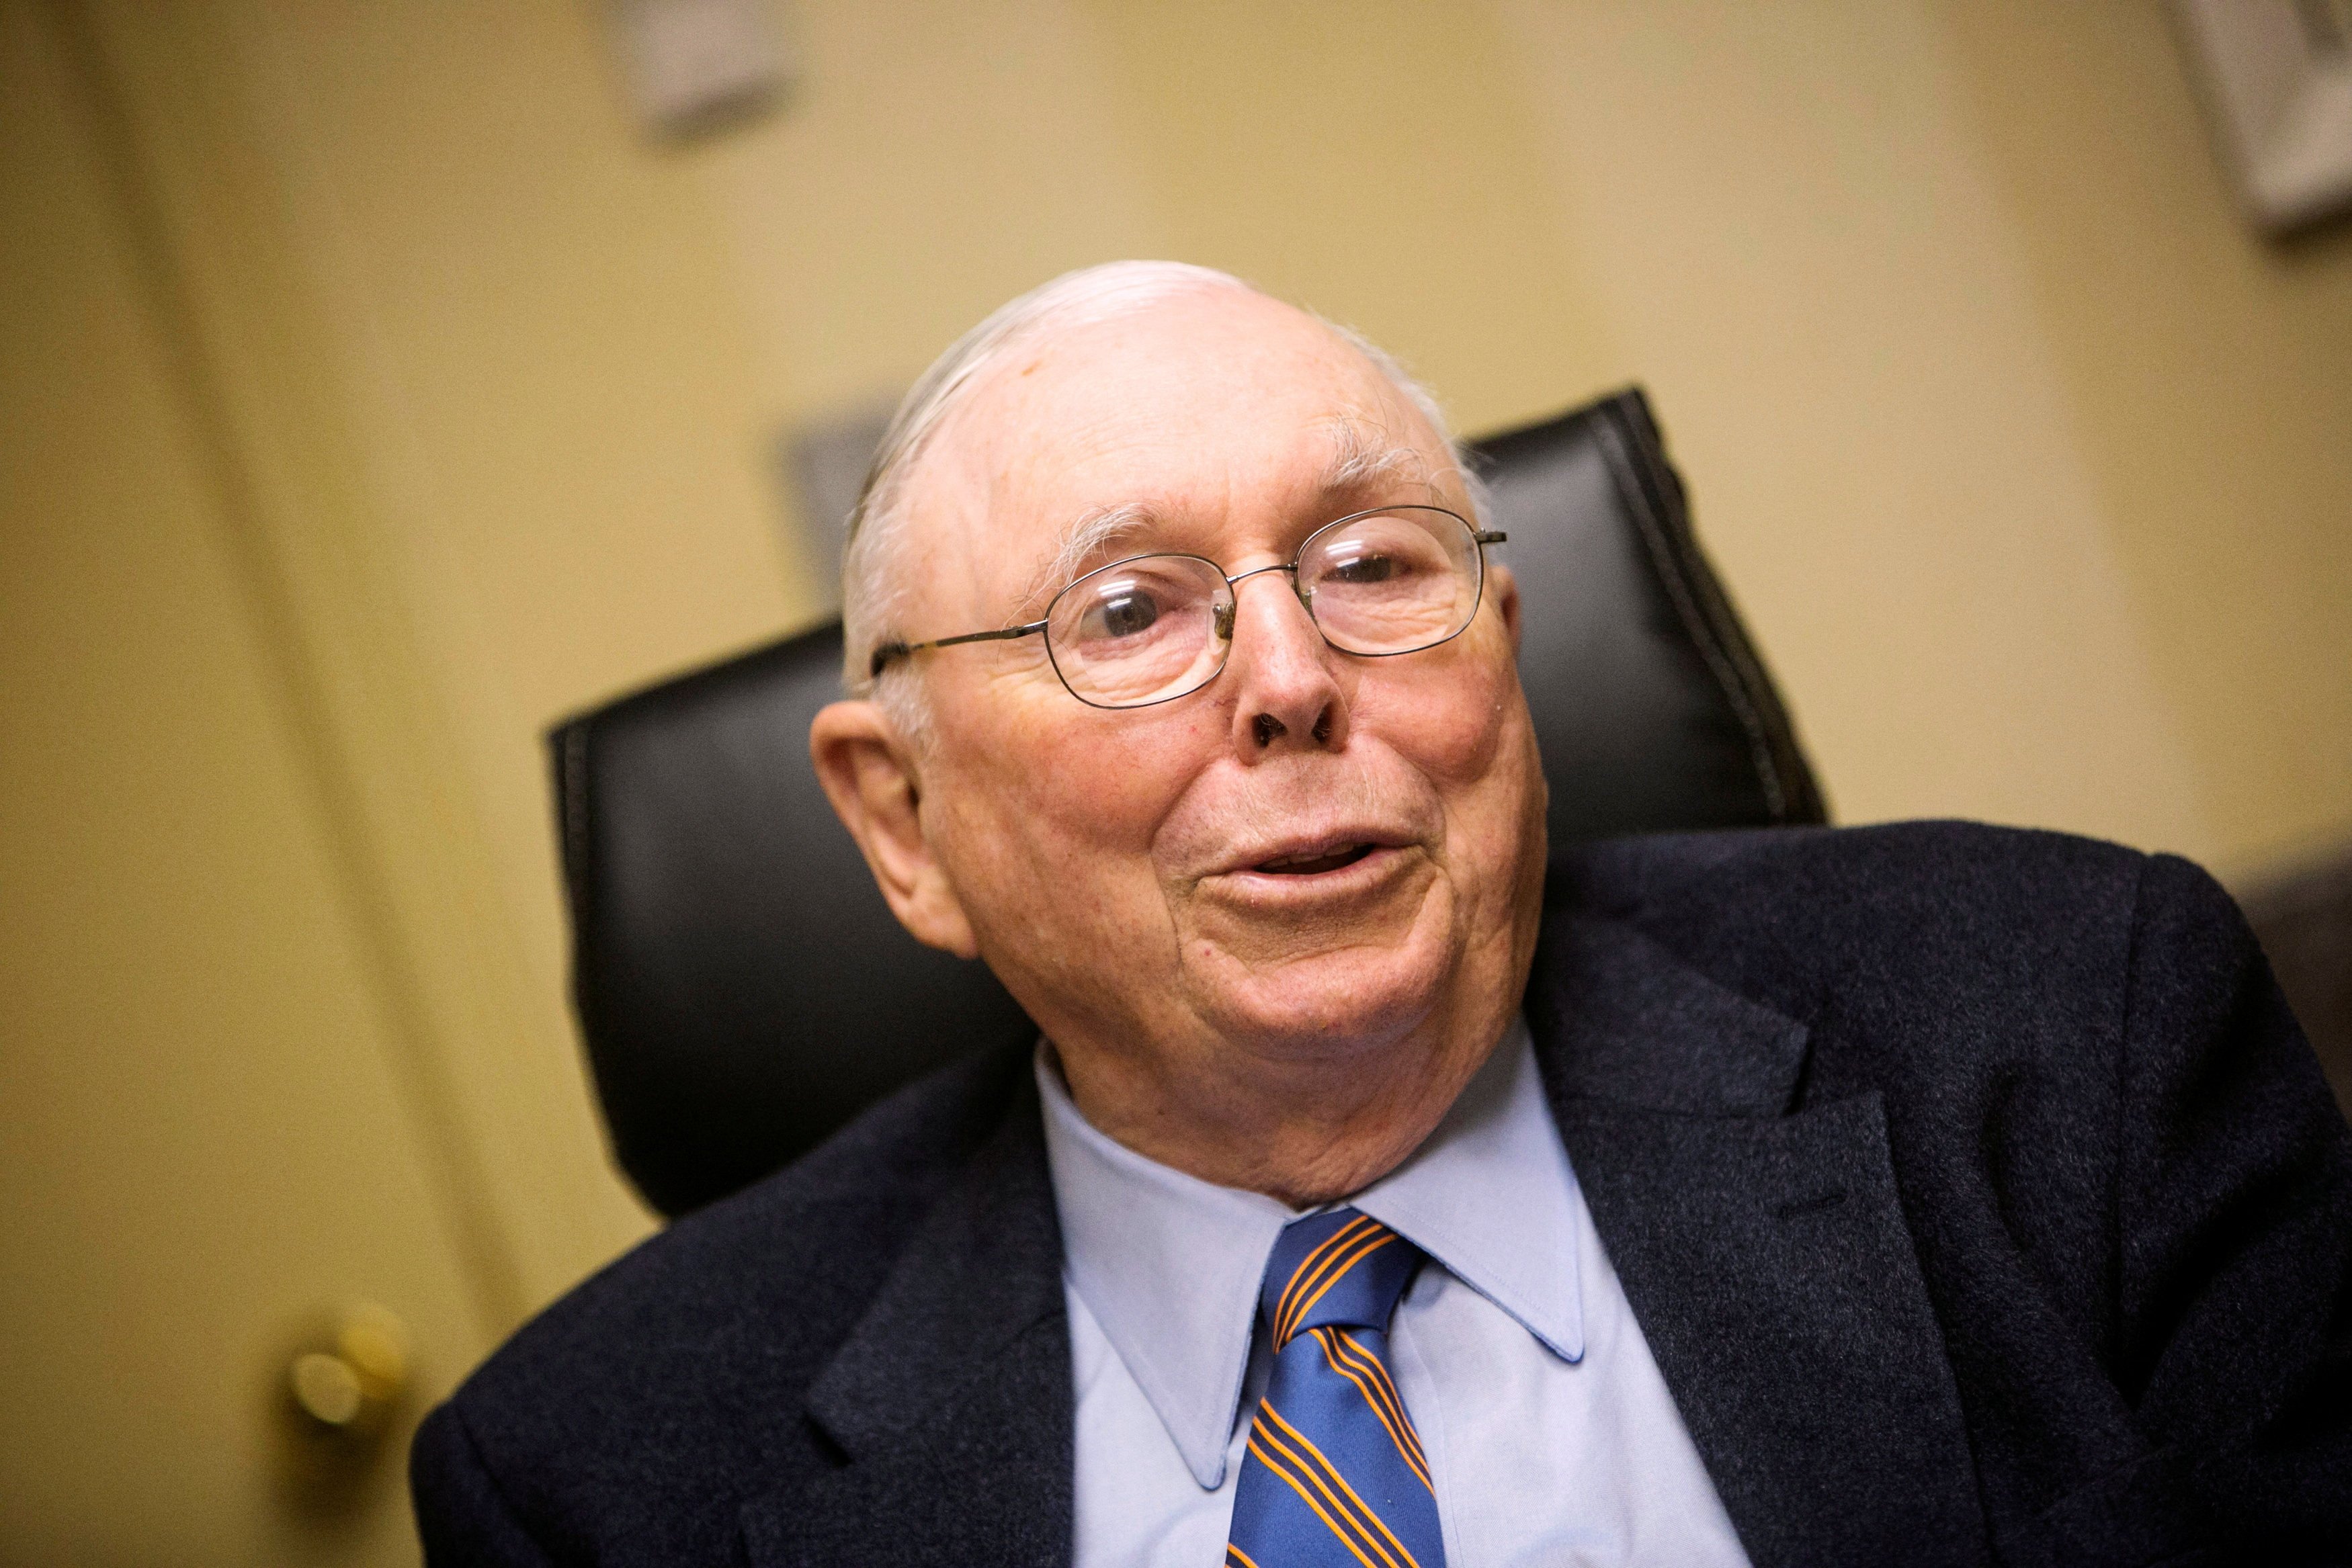 Berkshire Hathaway Vice-Chairman Charlie Munger speaks during an interview in Omaha, Nebraska, in May 2013. Photo: Reuters